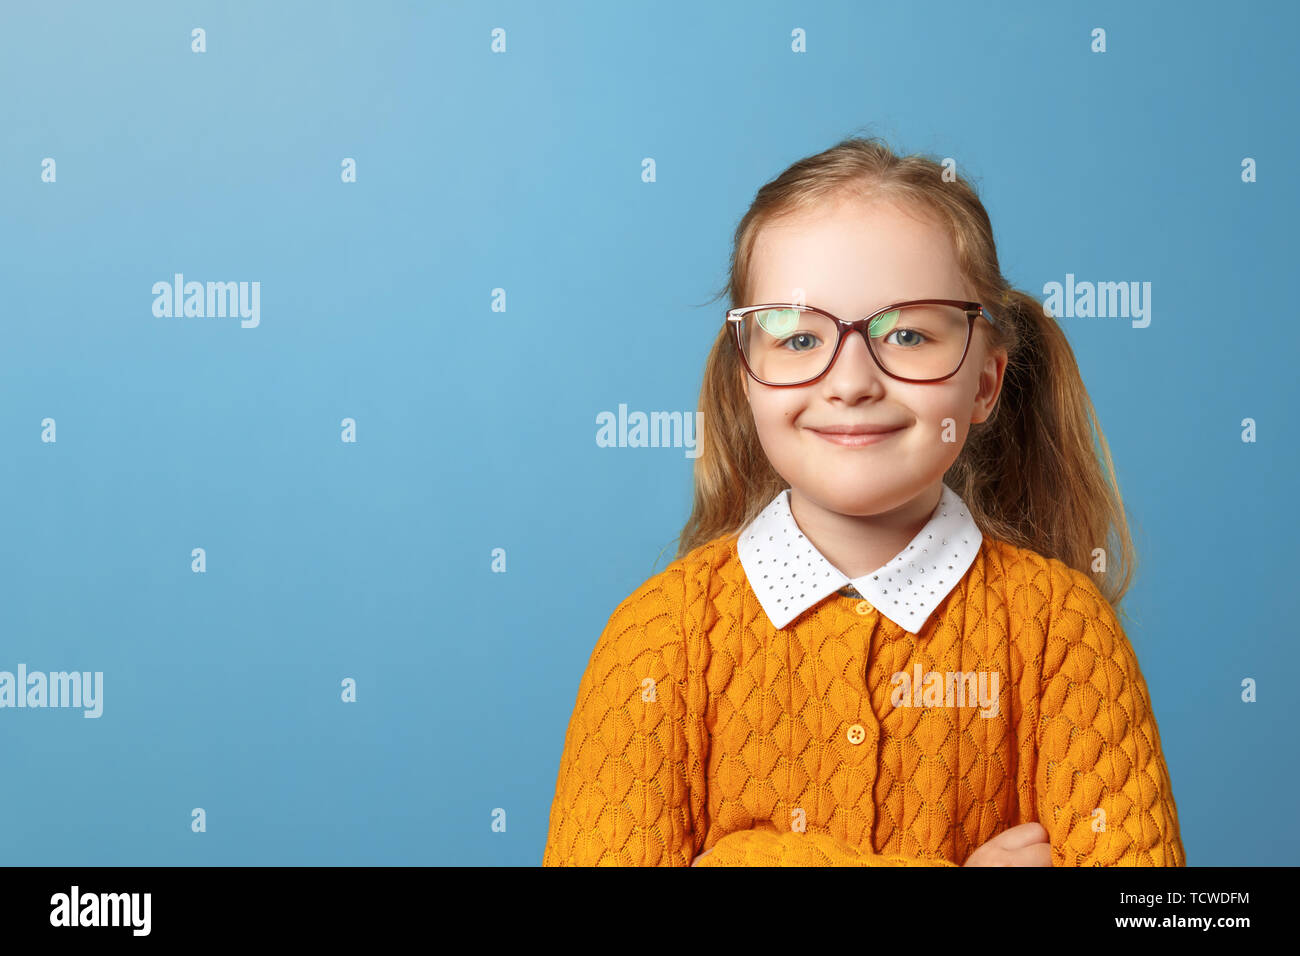 Closeup portrait of little girl schoolgirl with glasses. Pretty child in a yellow sweater on a blue background. Copy space Stock Photo